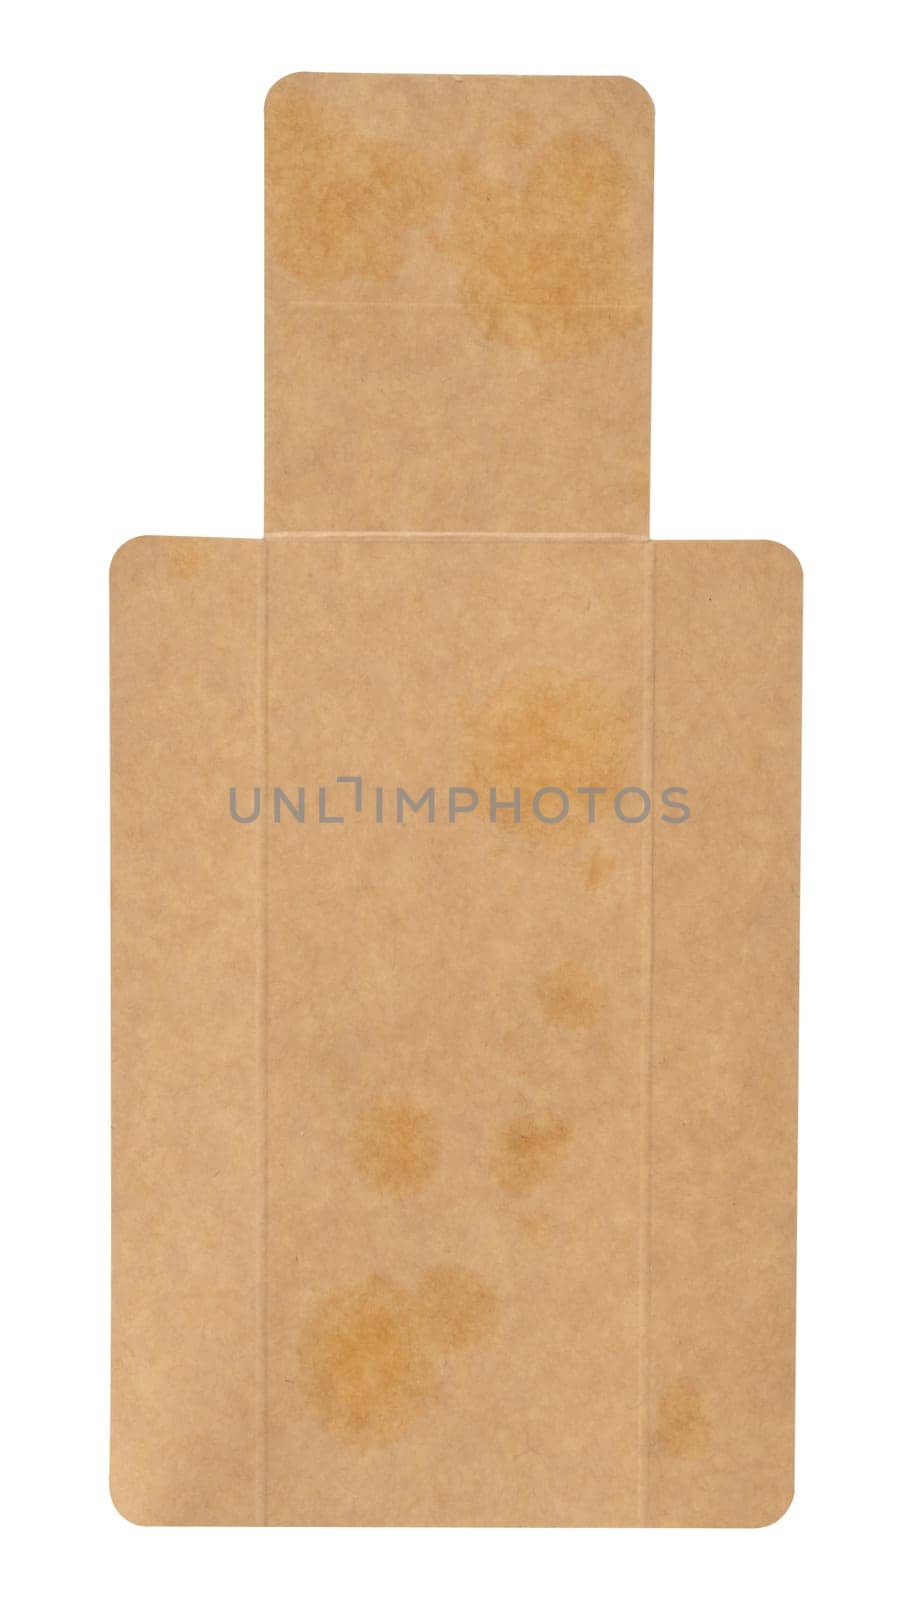 Brown cardboard liner for box on isolated background by ndanko